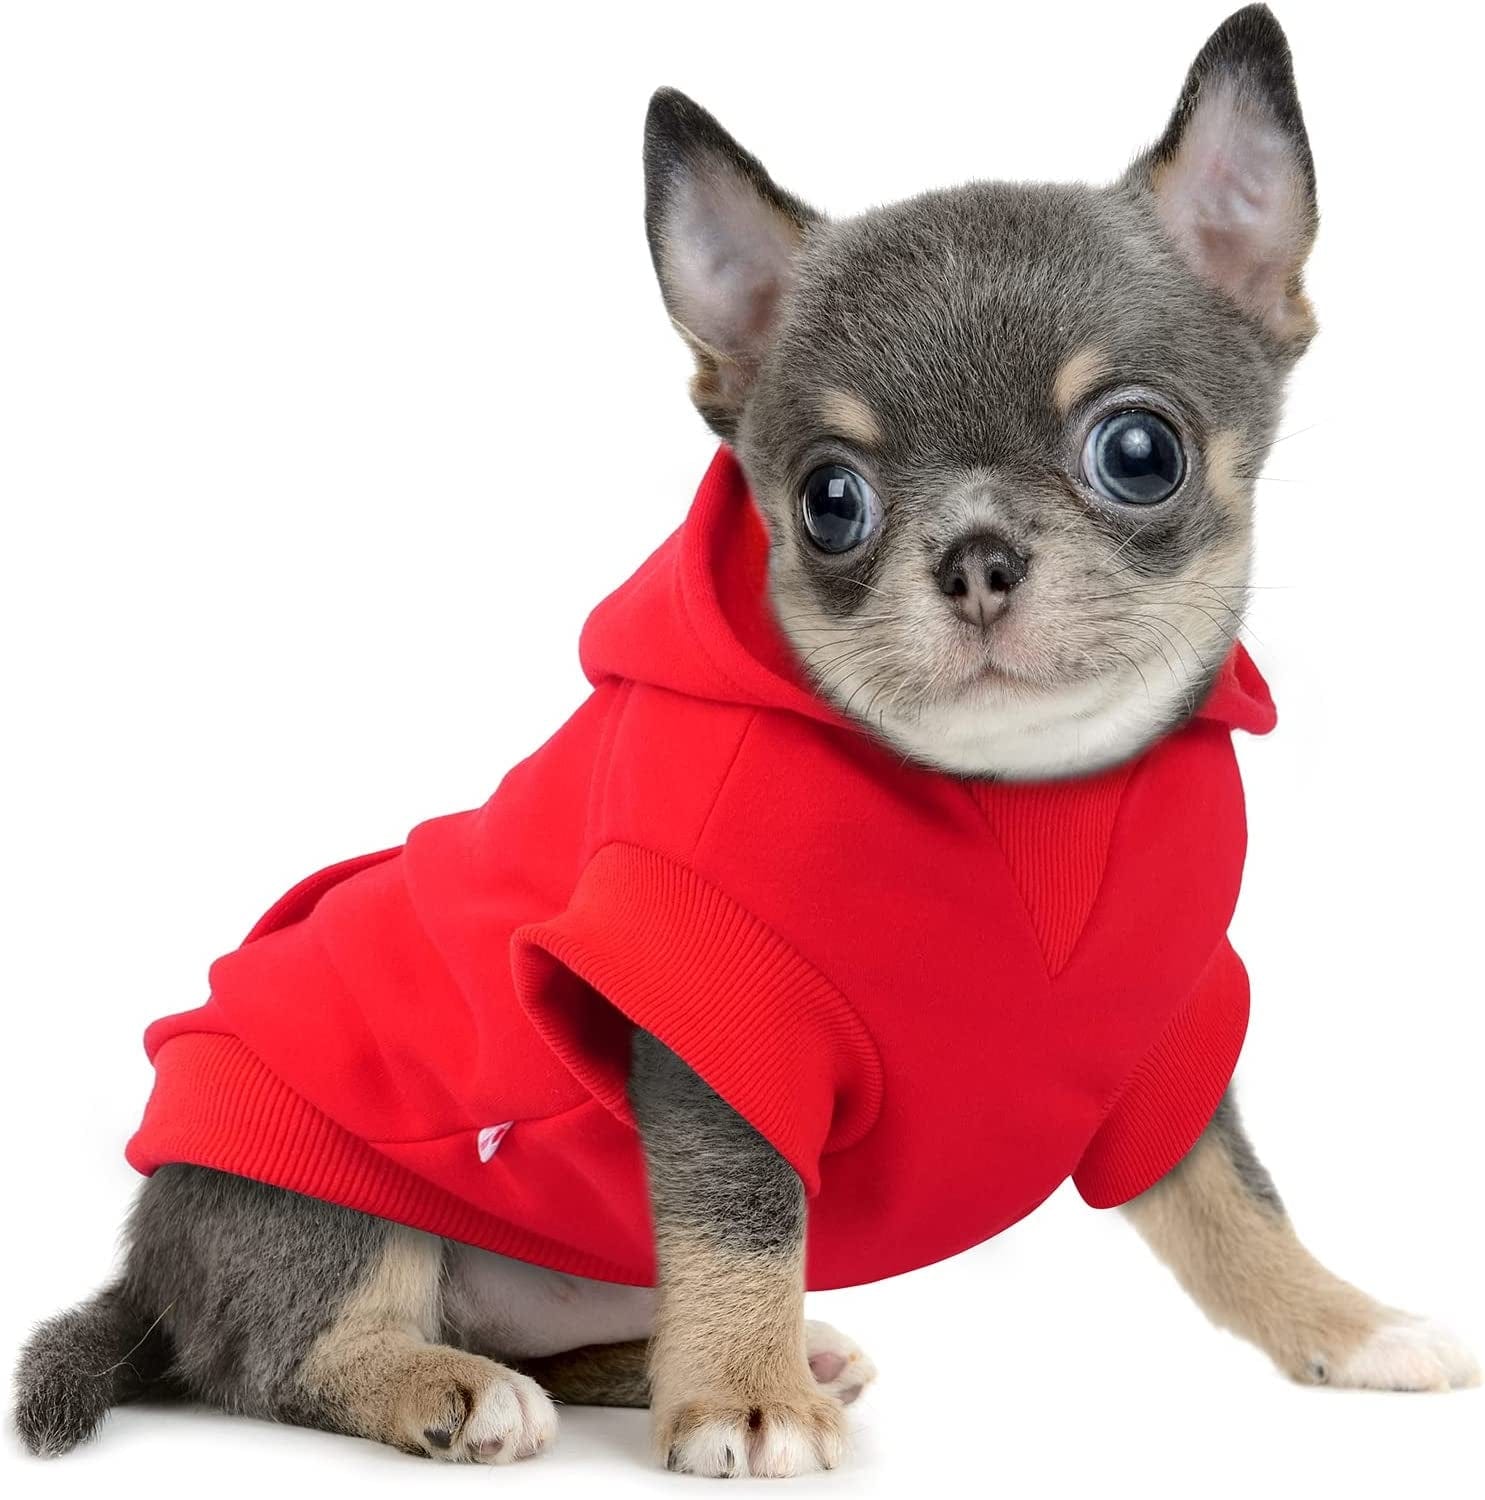 𝐍𝐄𝐖 𝐀𝐑𝐑𝐈𝐕𝐀𝐋 Frienperro Dog Clothes for Small Dogs Girl Boy, 100% Cotton Buffalo Plaid Small Dog Hoodie, Chihuahua Clothes Pet Cat Winter Warm Sweatshirt Sweater, Teacup Yorkie Puppy Coat Animals & Pet Supplies > Pet Supplies > Dog Supplies > Dog Apparel Frienperro Red XXX-Small 